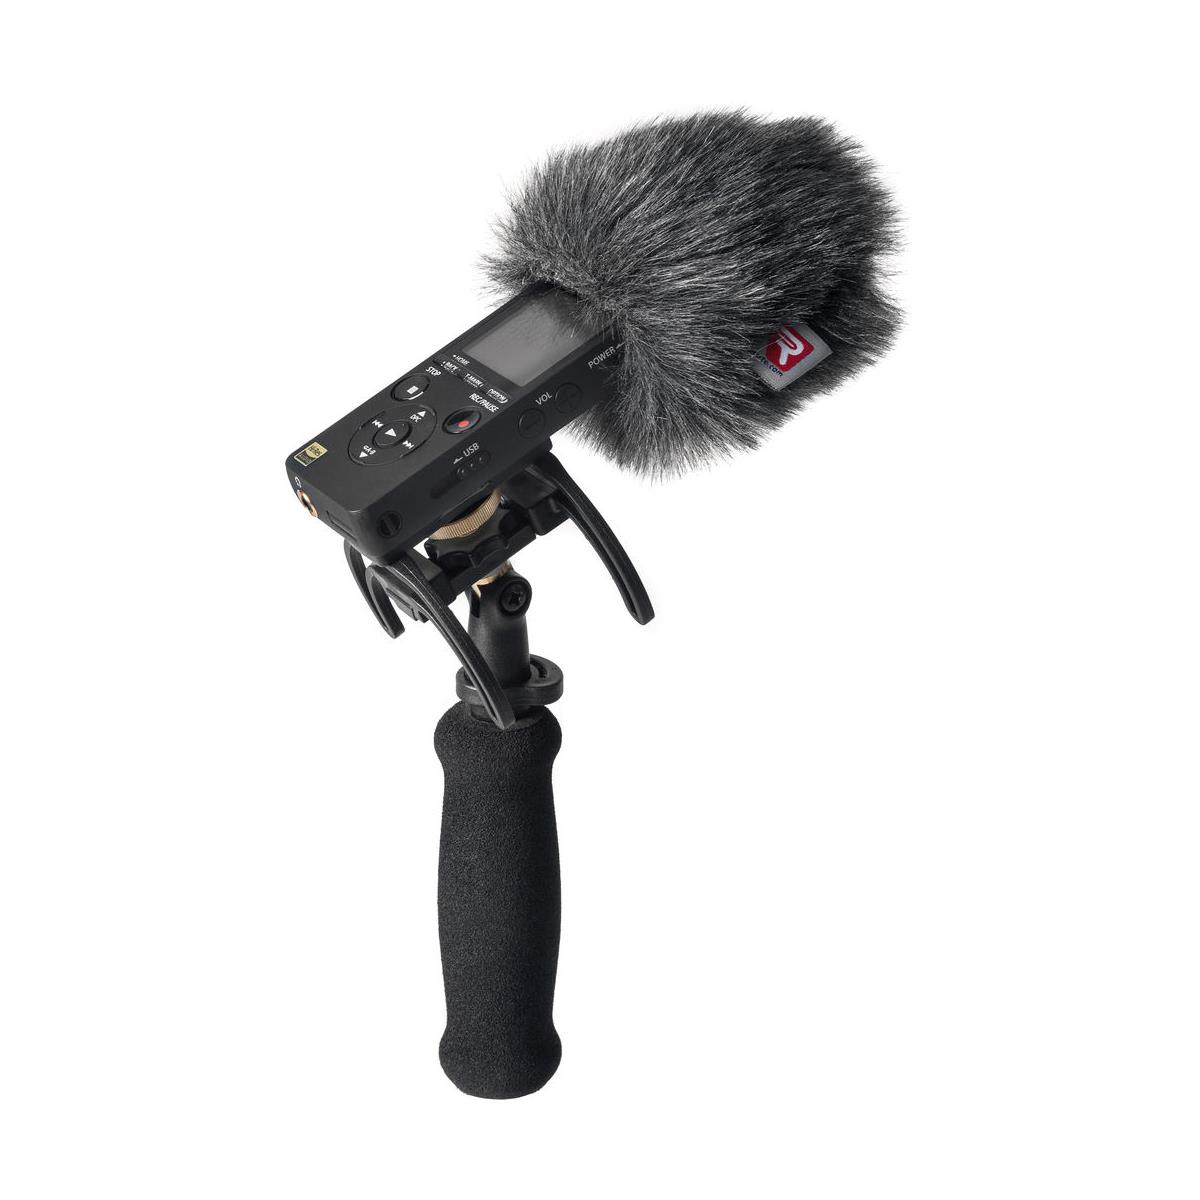 Image of Rycote Recorder Kit for Sony ICD-SX2000 Recorder